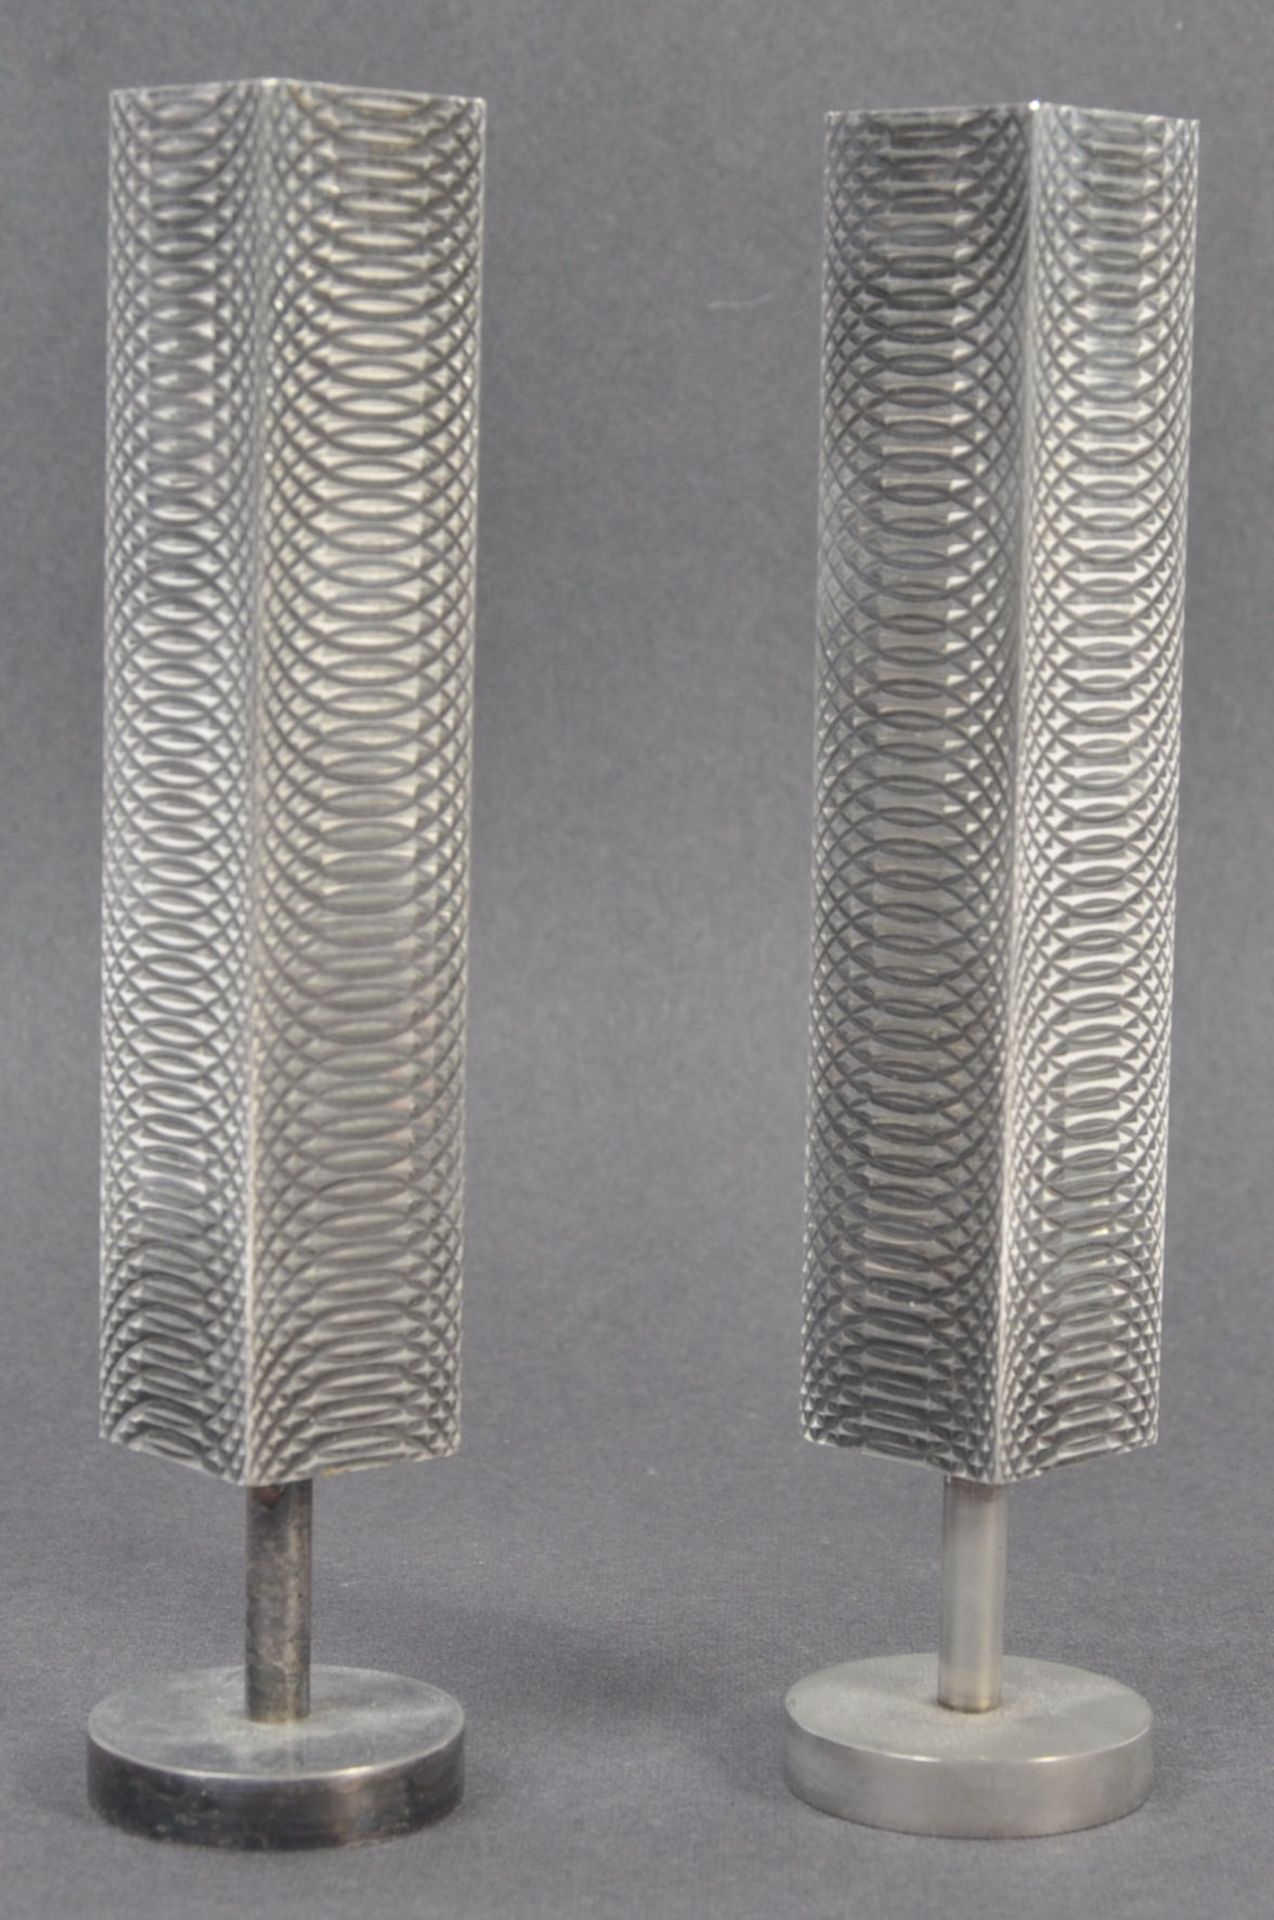 M&R LATE 20TH CENTURY SILVER PLATED SQUARE BUD VASES - Image 2 of 4